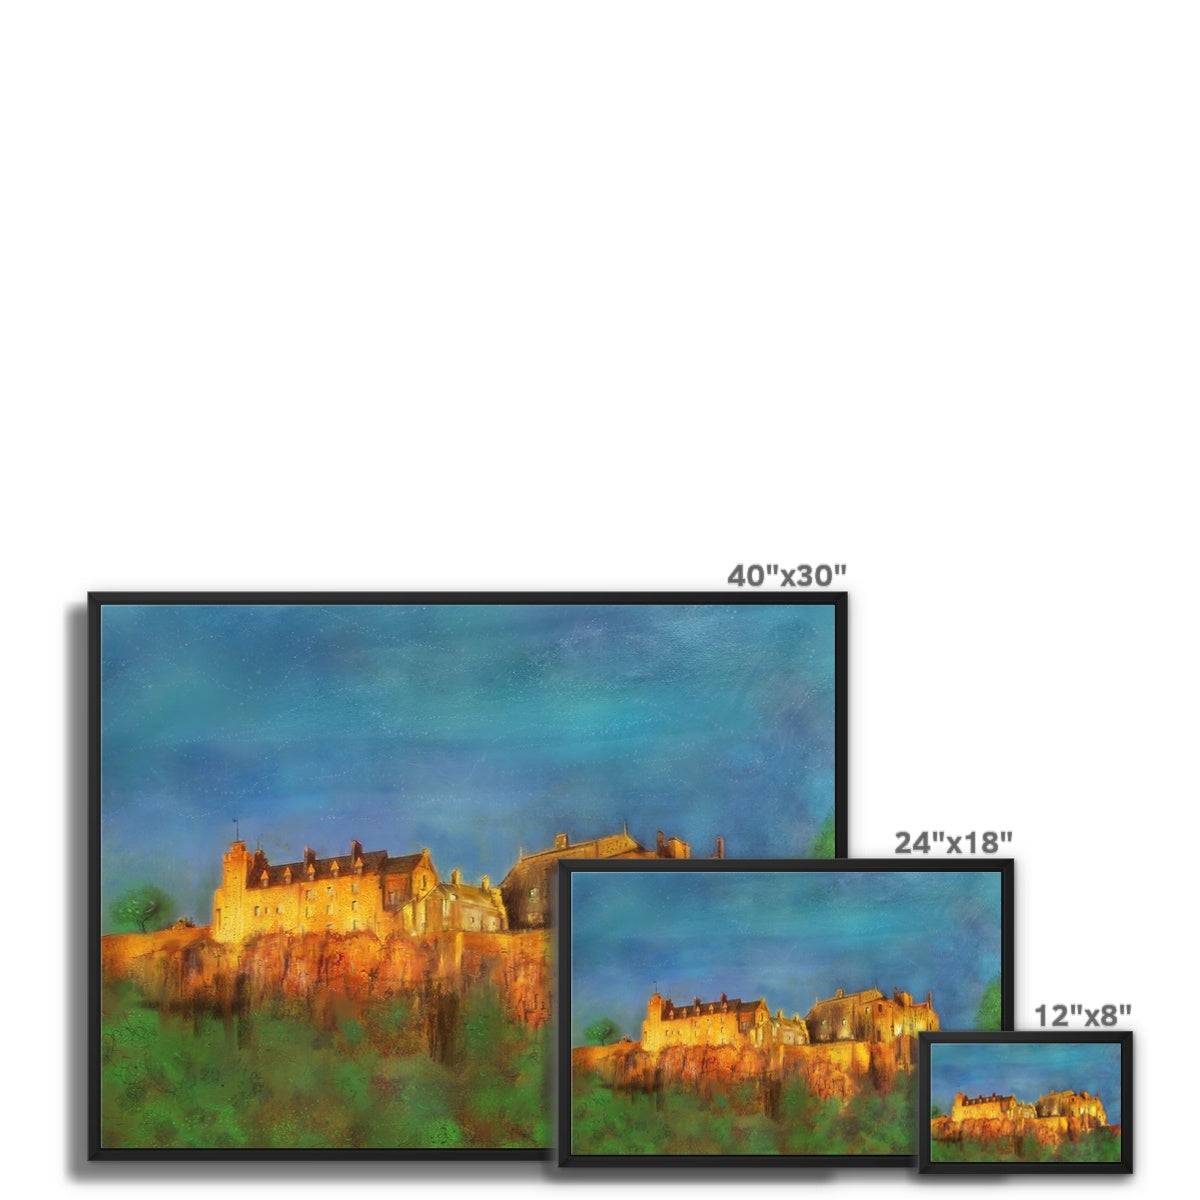 Stirling Castle Painting | Framed Canvas From Scotland-Floating Framed Canvas Prints-Historic & Iconic Scotland Art Gallery-Paintings, Prints, Homeware, Art Gifts From Scotland By Scottish Artist Kevin Hunter